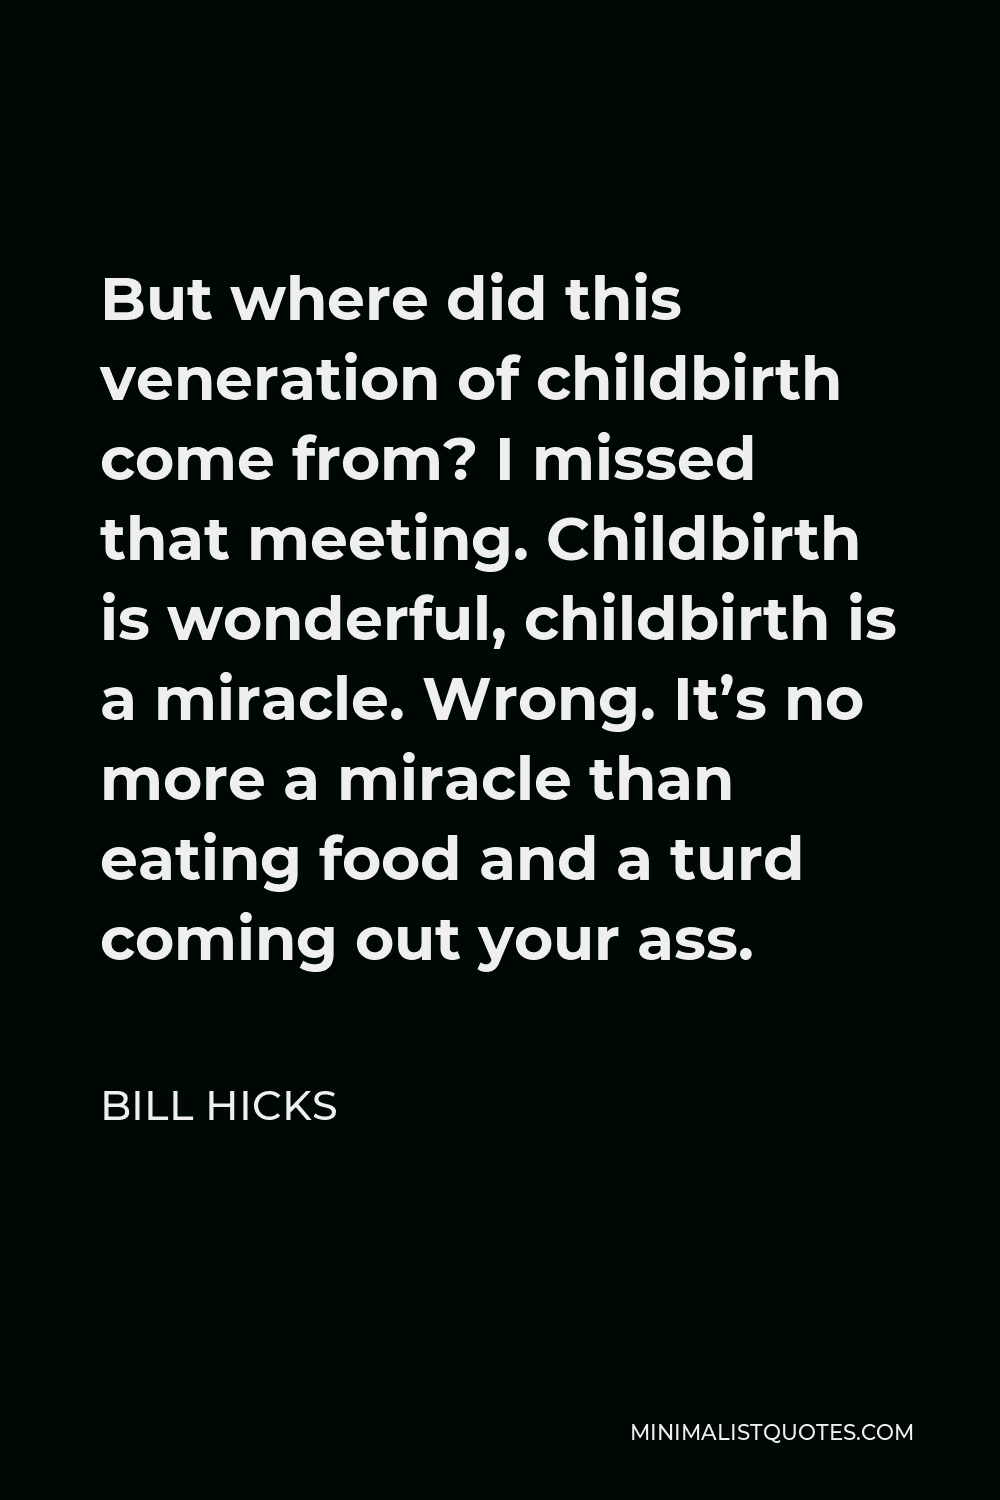 Bill Hicks Quote - But where did this veneration of childbirth come from? I missed that meeting. Childbirth is wonderful, childbirth is a miracle. Wrong. It’s no more a miracle than eating food and a turd coming out your ass.